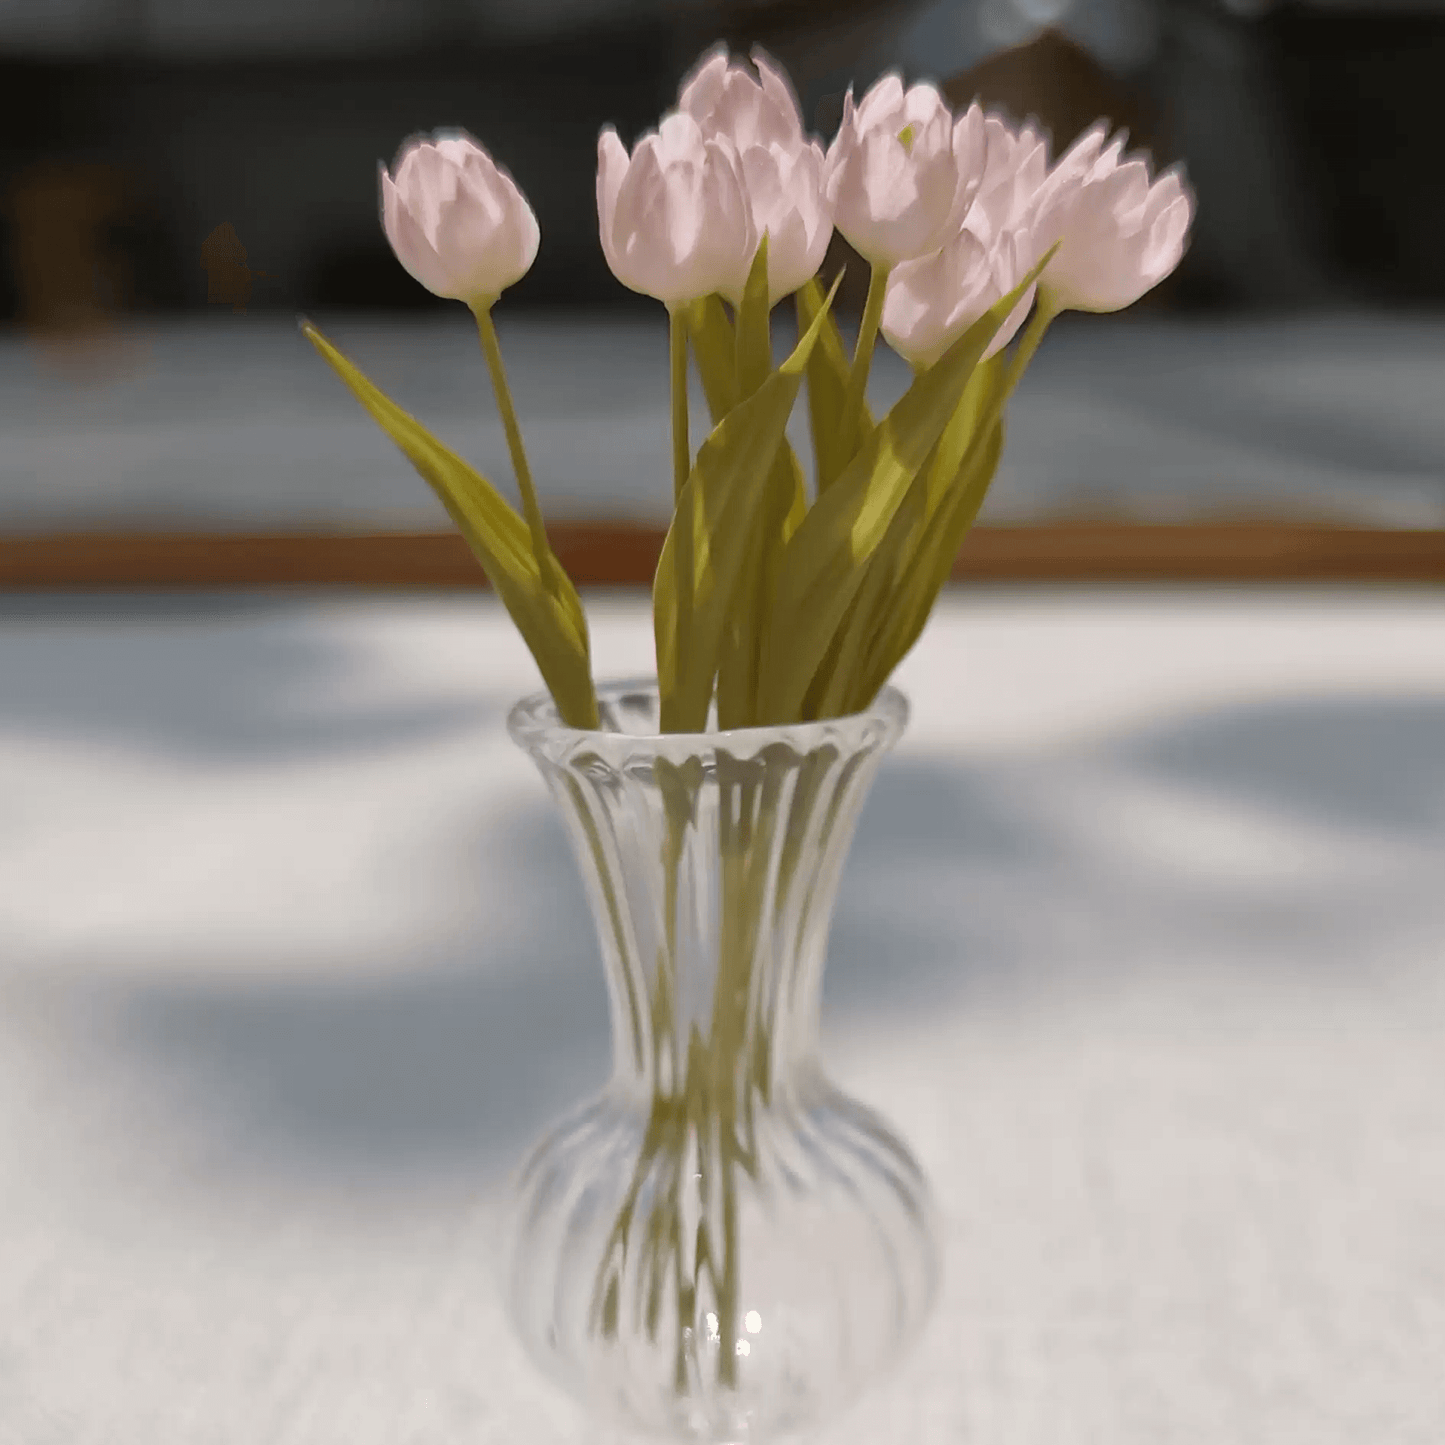 A delicate tulip bouquet is graceful, elegant and fun! Miniature for dolls, dollhouses, roomboxes. Suitable for Blythe, Barbie, Paola,and other dolls with a height of 25-40cm (10-15.8 inches). Scale: 1:6; 1:12 Material: Handmade from Clay Size: Tulips blooms measure 0.4 inch across